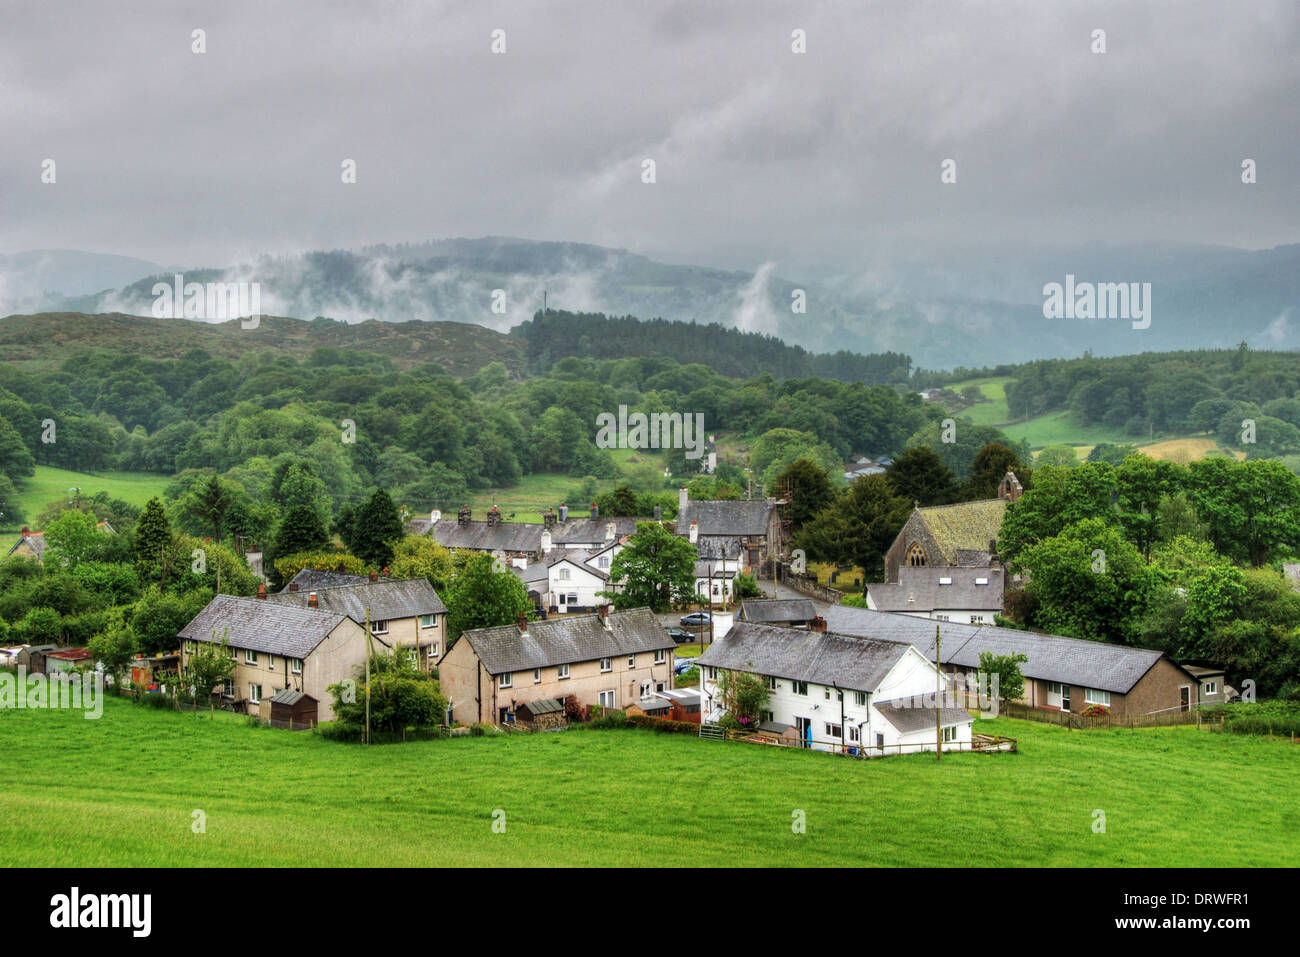 Rain clouds and fog over a small village in North Wales Stock Photo